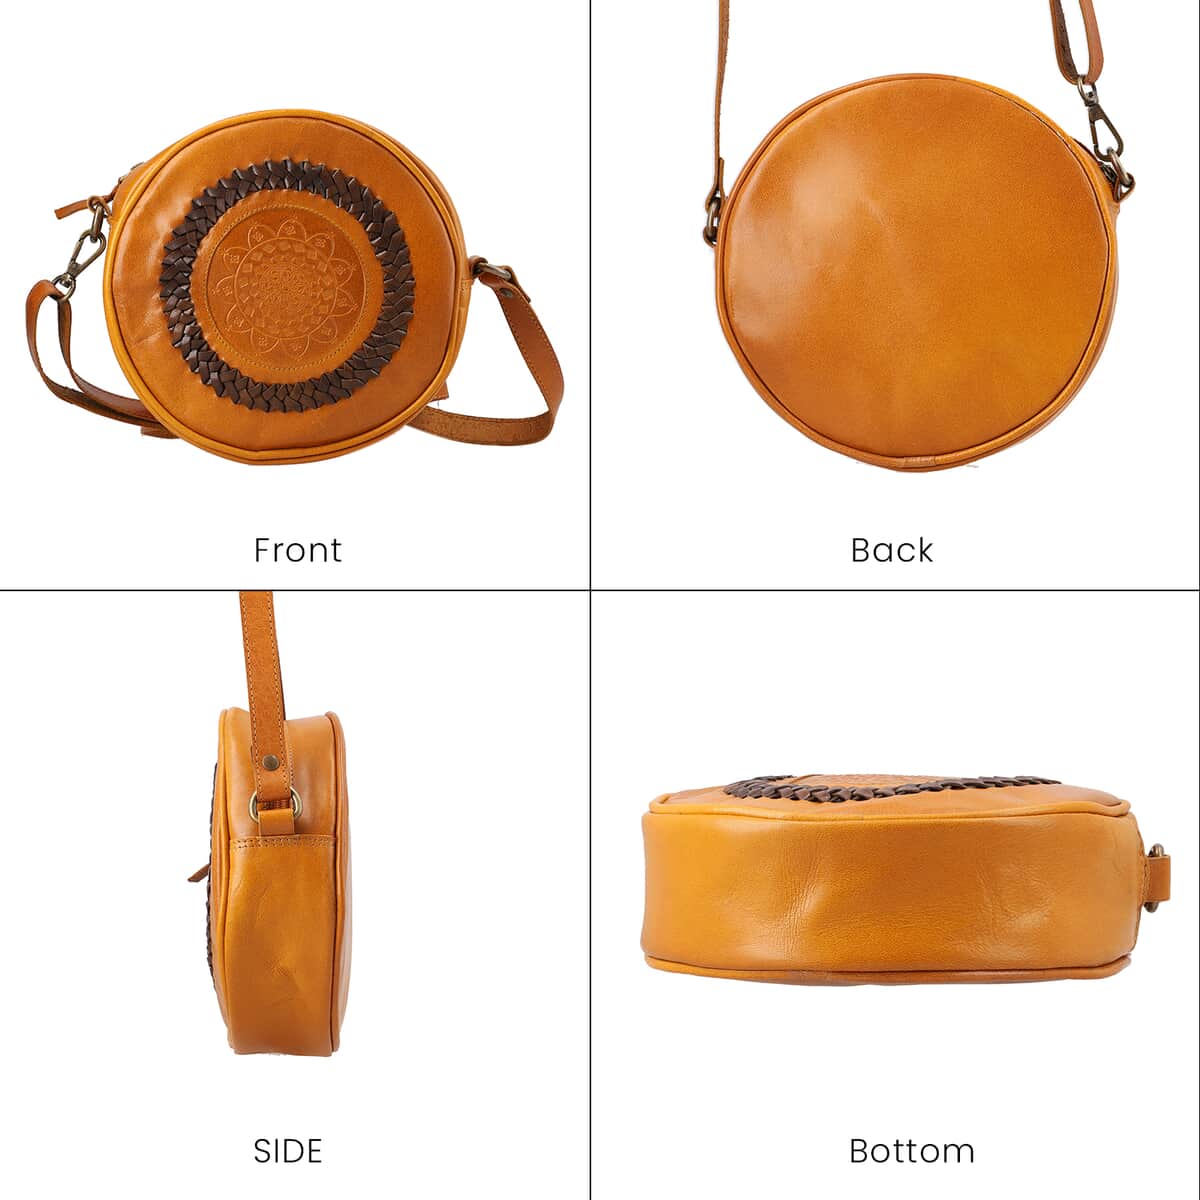 Shop LC Genuine Leather Weaving Round Crossbody Bag with Detachable Strap